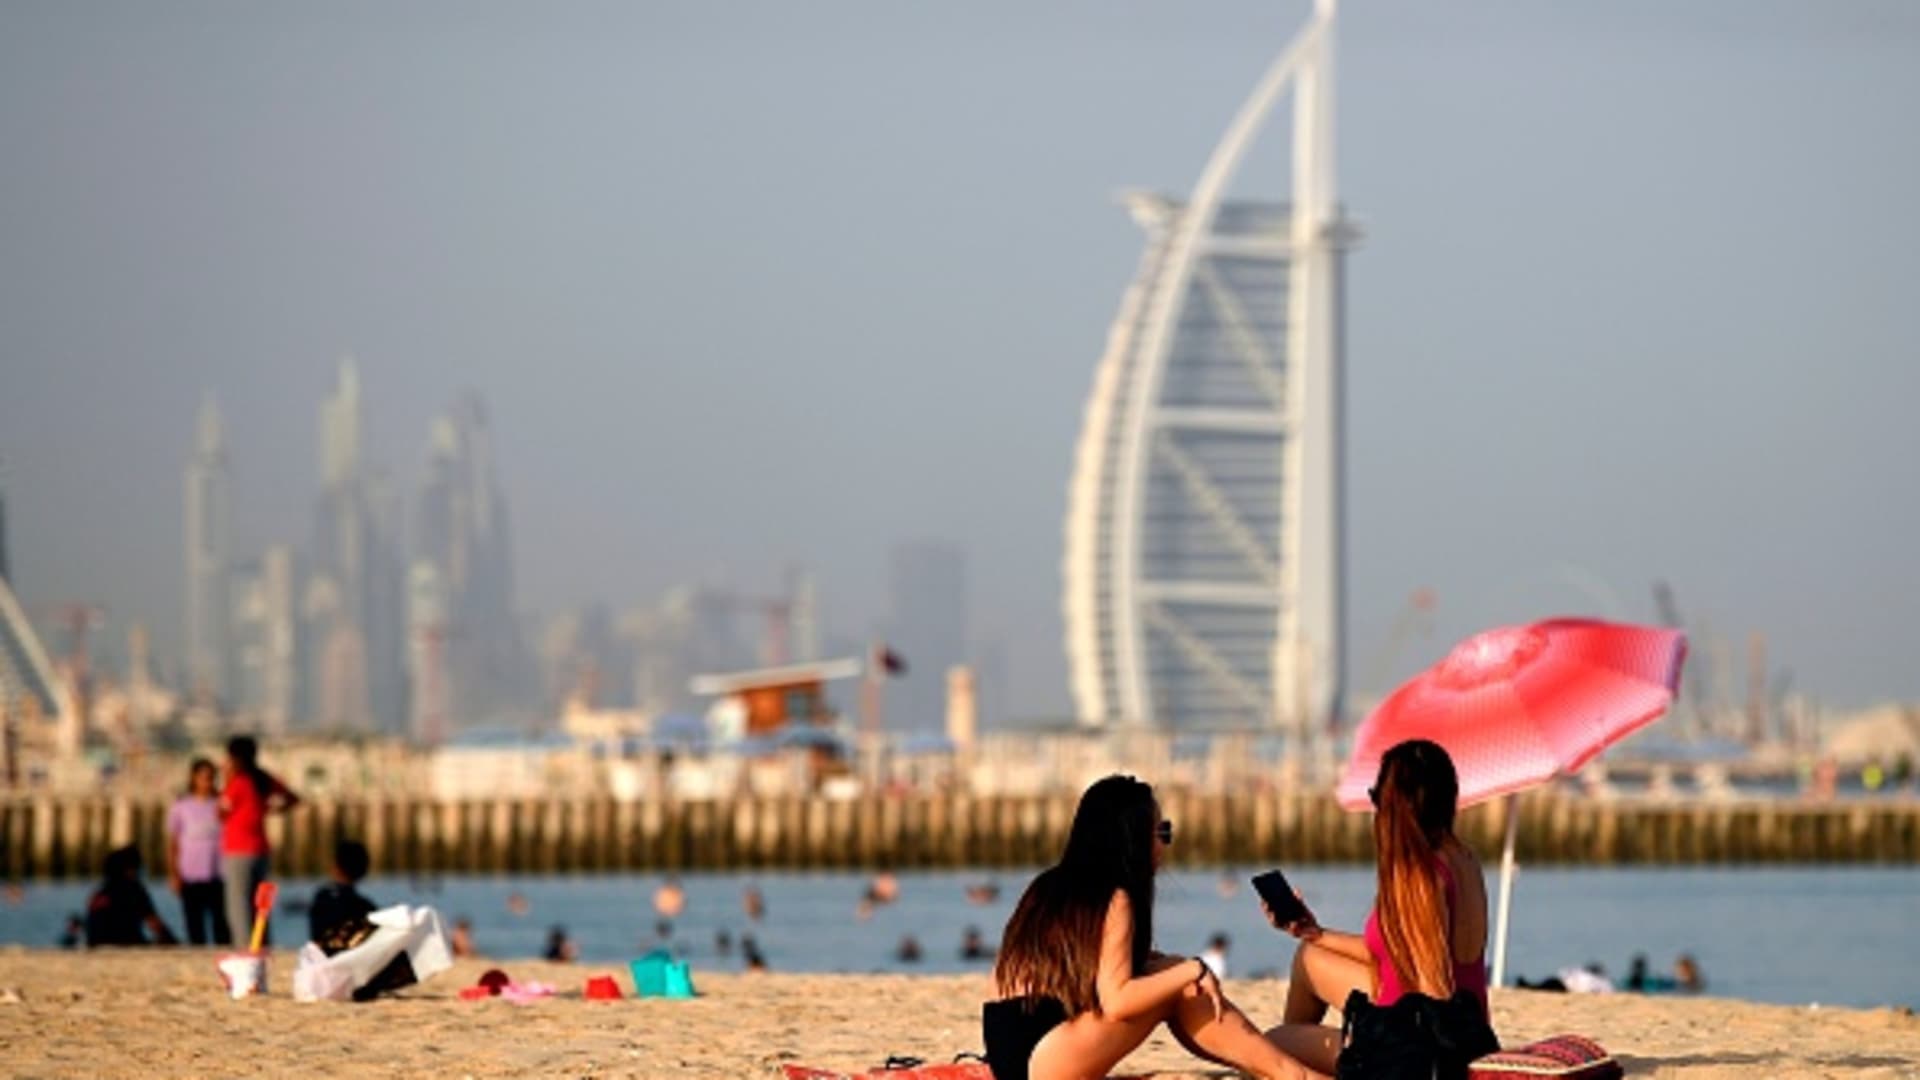 Woman sunbathers sit along a beach in the Gulf emirate of Dubai on July 24, 2020, while behind is seen the Burj al-Arab hotel.